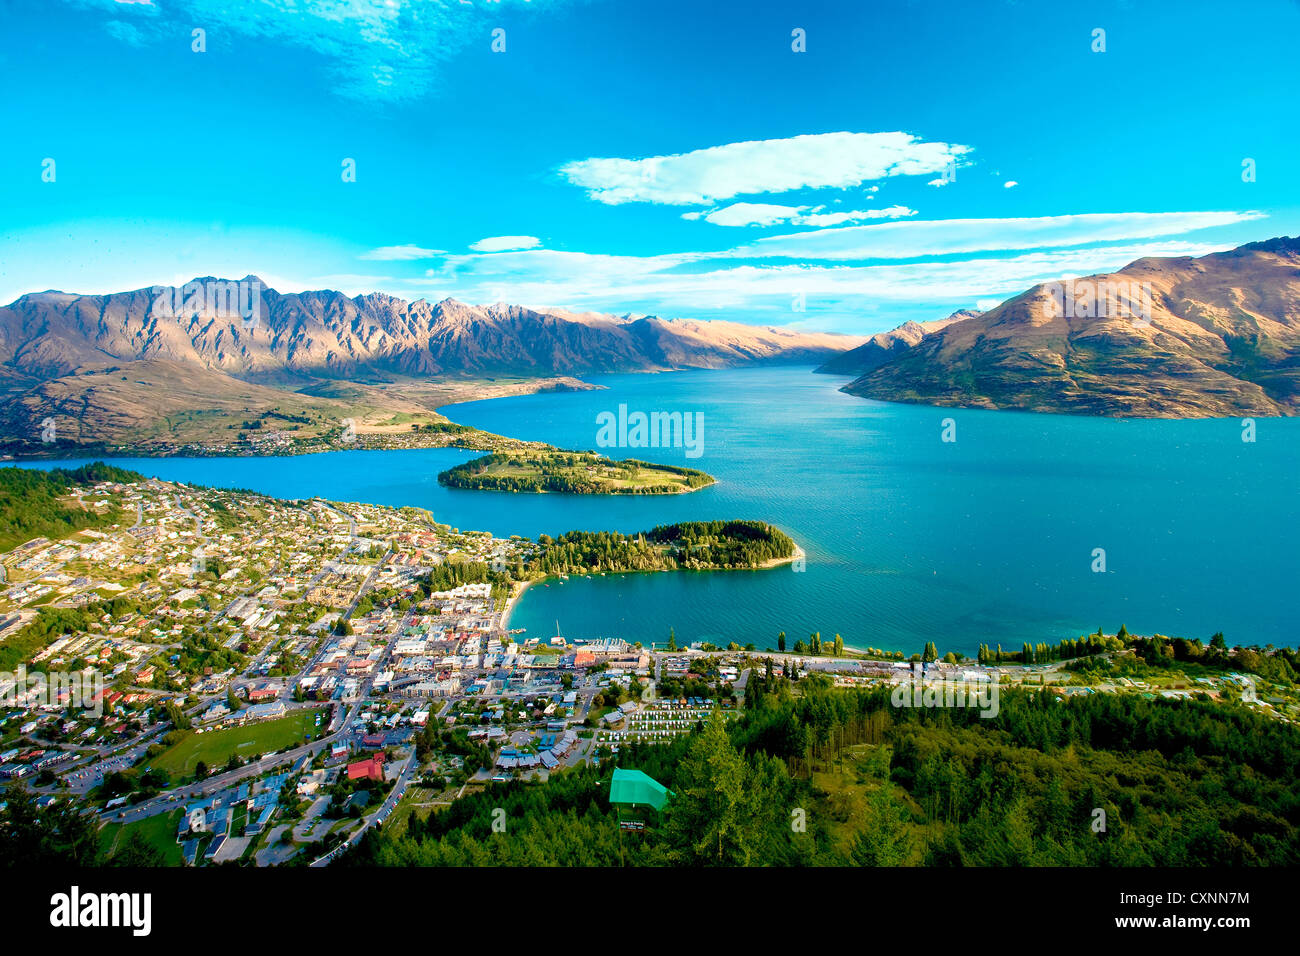 New Zealand, South Island, View towards Queenstown and Wakatipu Lake with the Formidable Mountain Range in the background. Stock Photo